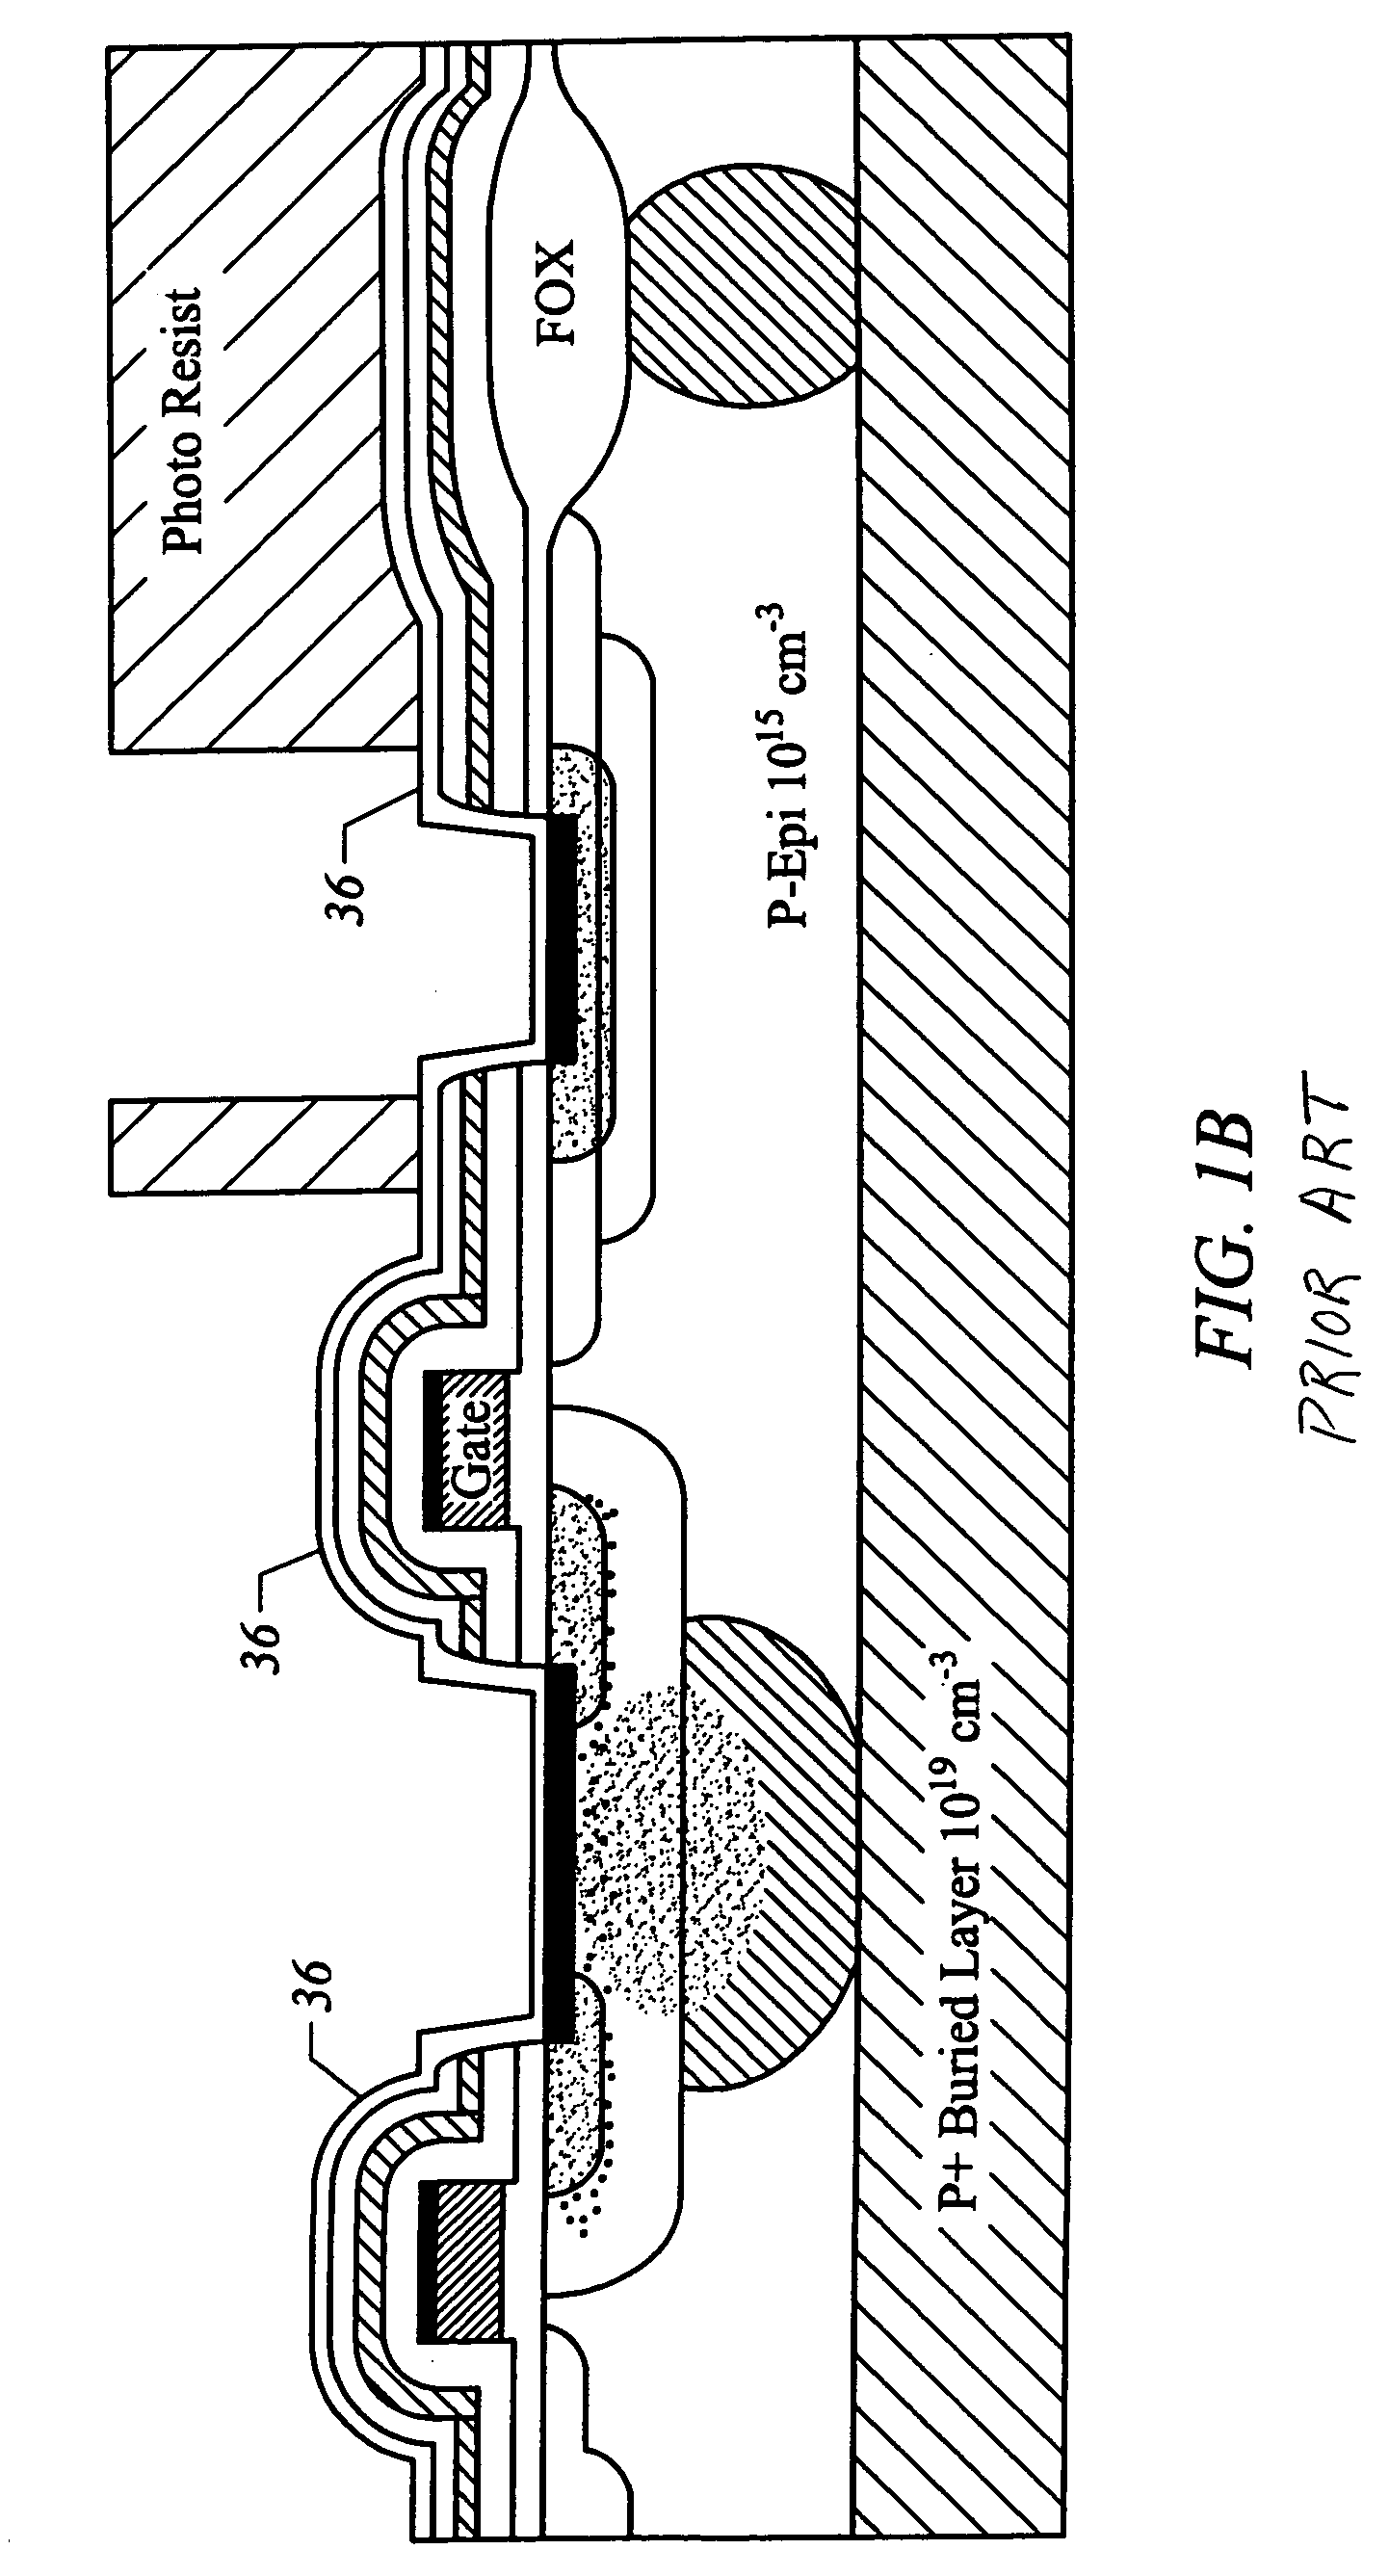 LDMOS transistor with improved gate shield